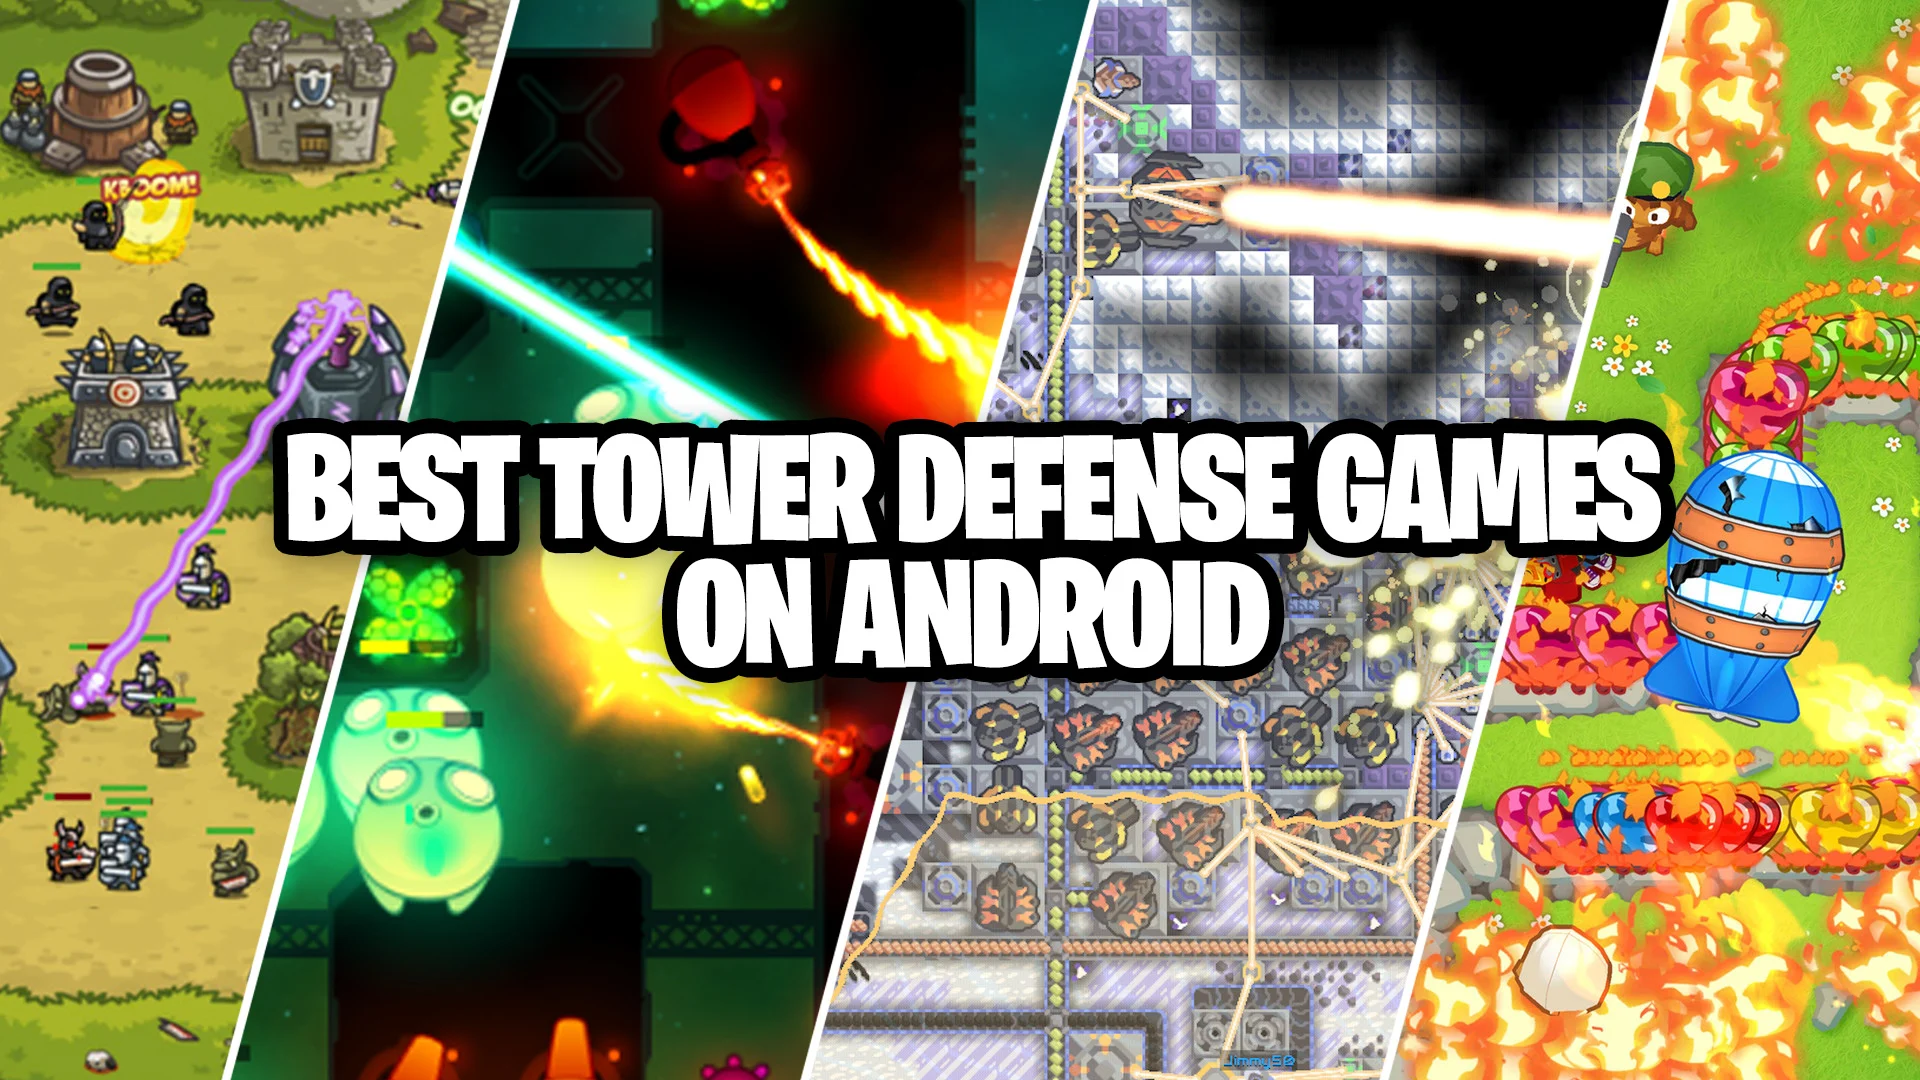 The 8 Best Tower Defense Games for Android